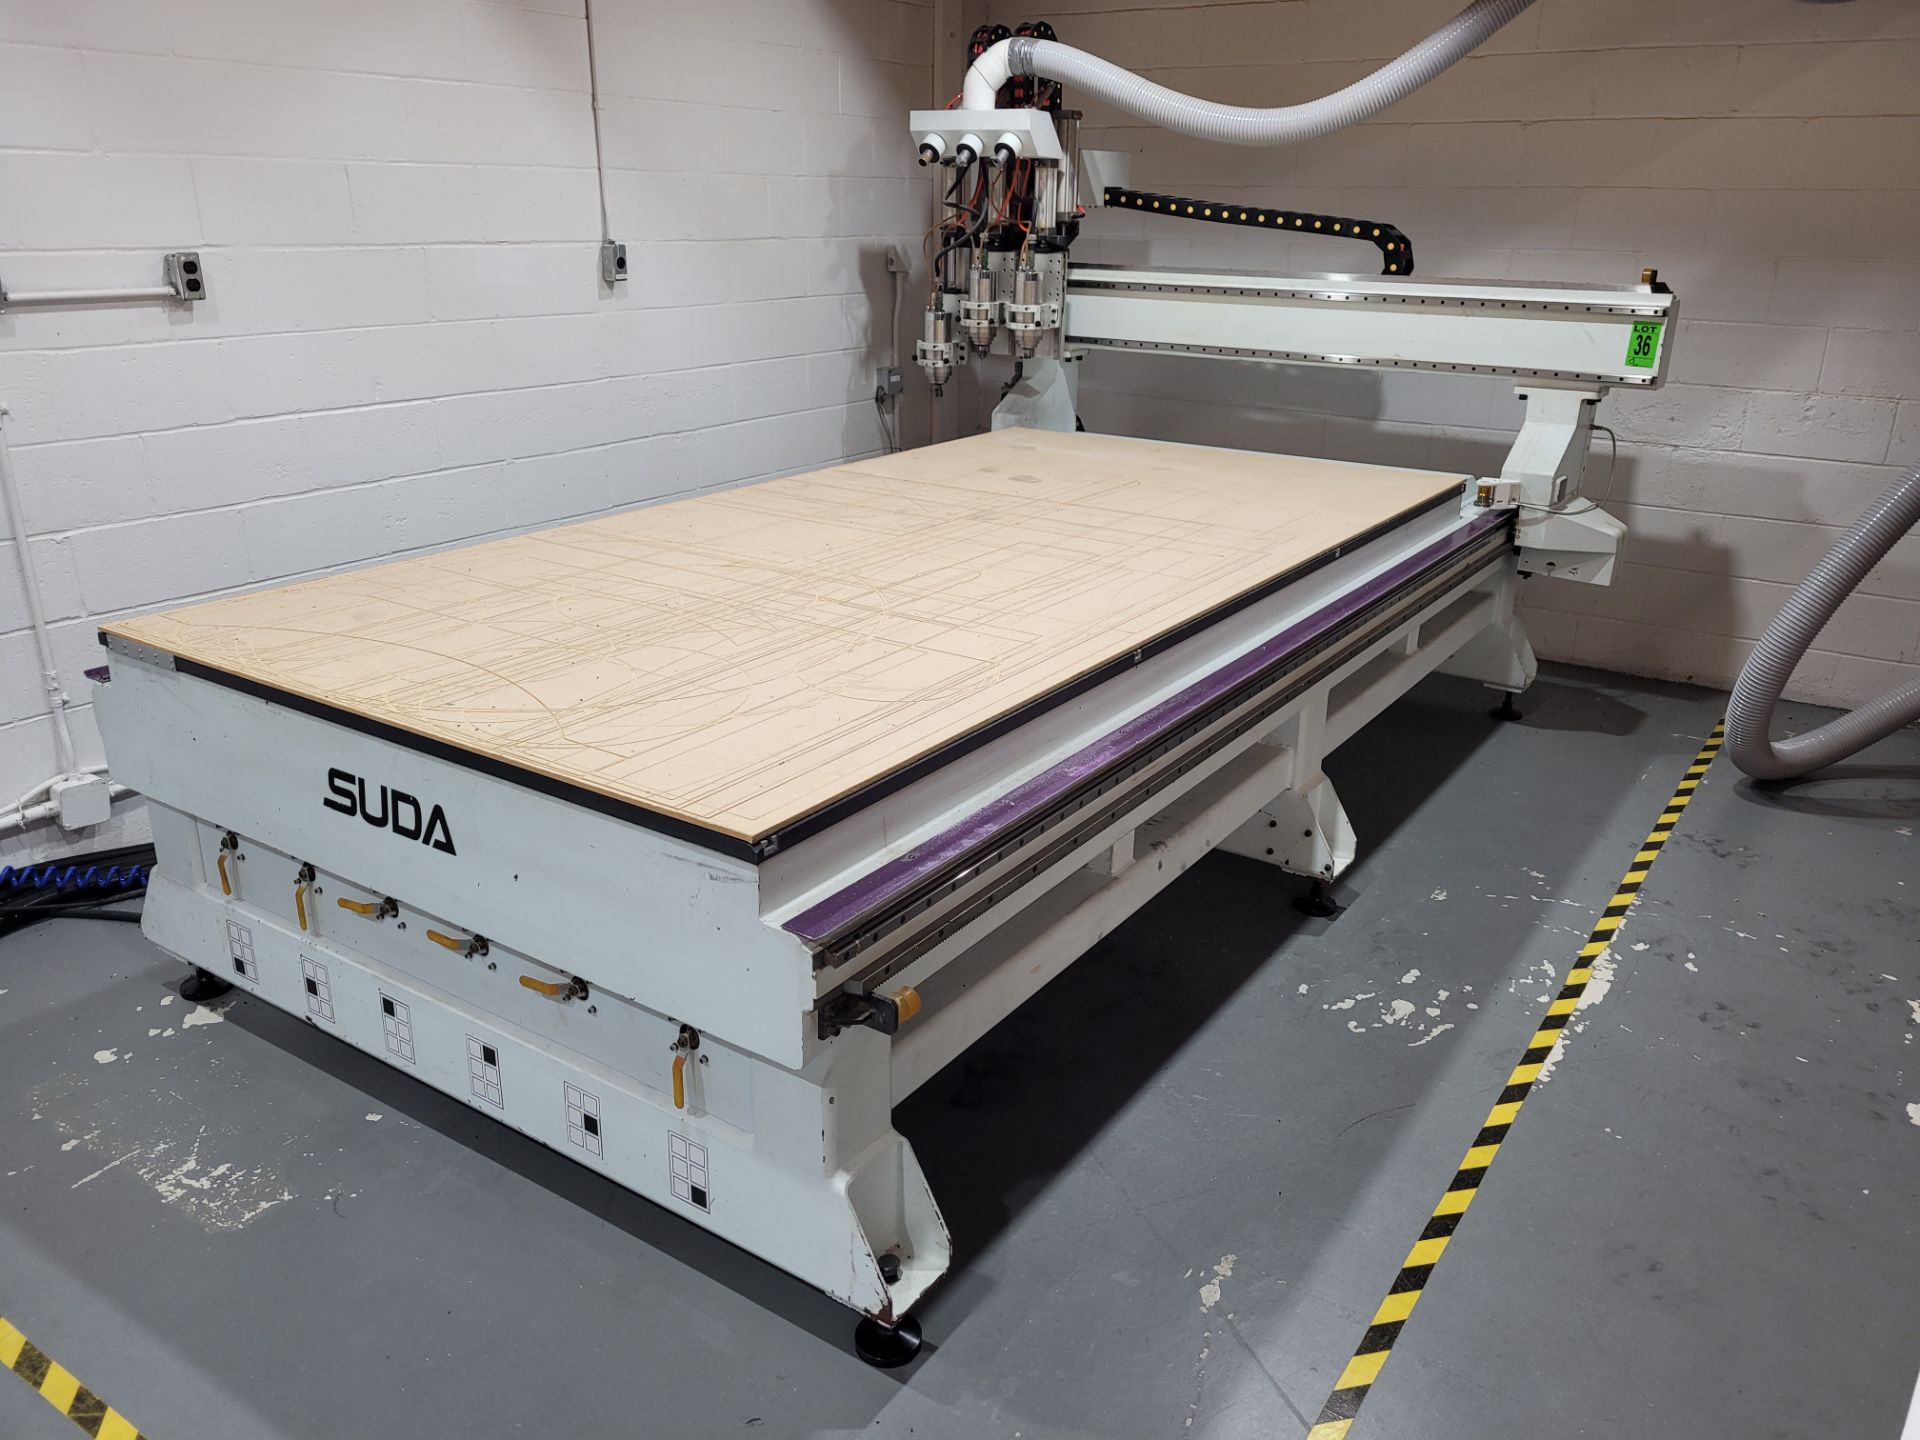 2015 SUDA ATC CNC Router mod. MG1630C, 3-Head System with Accessories and CRAFTEX mod. FM-300 Collec - Image 50 of 51